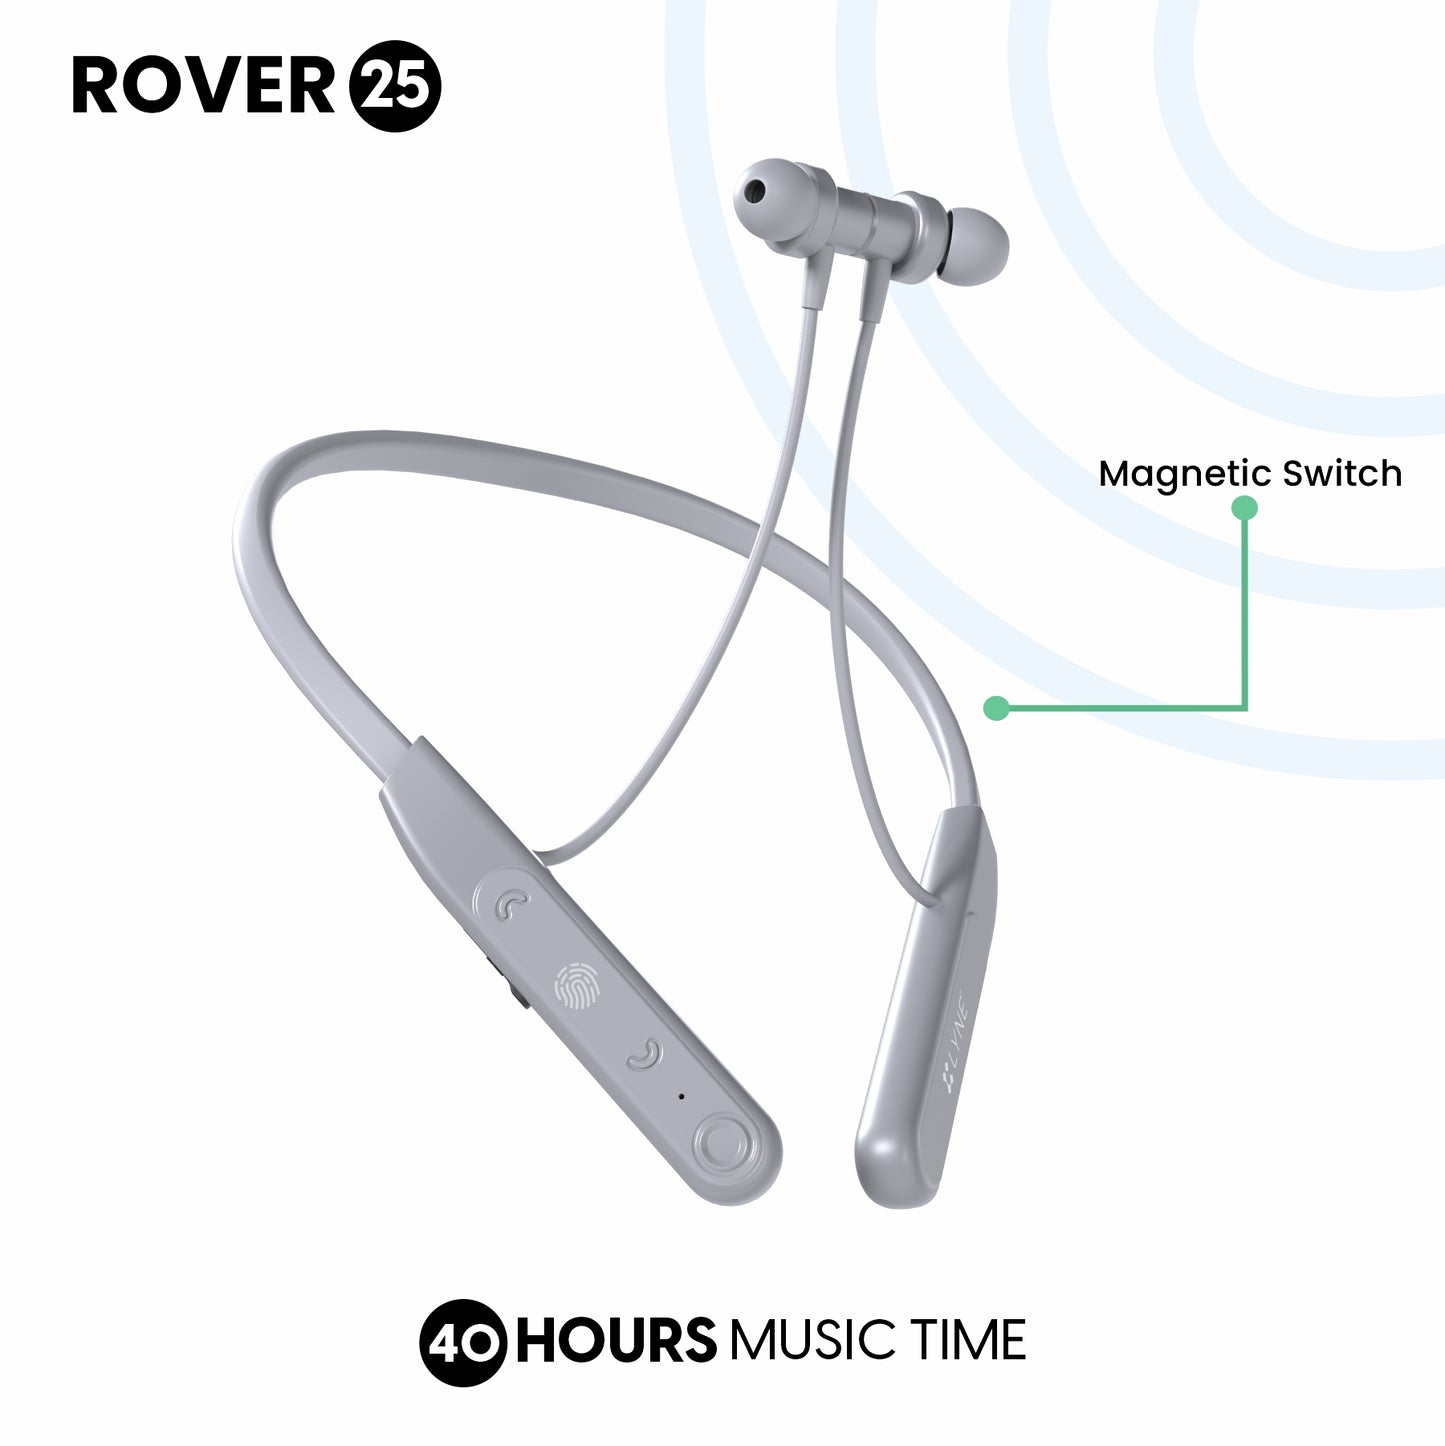 LYNE Rover 25 40 Hours Music Time Bluetooth Neckband with Touch Function